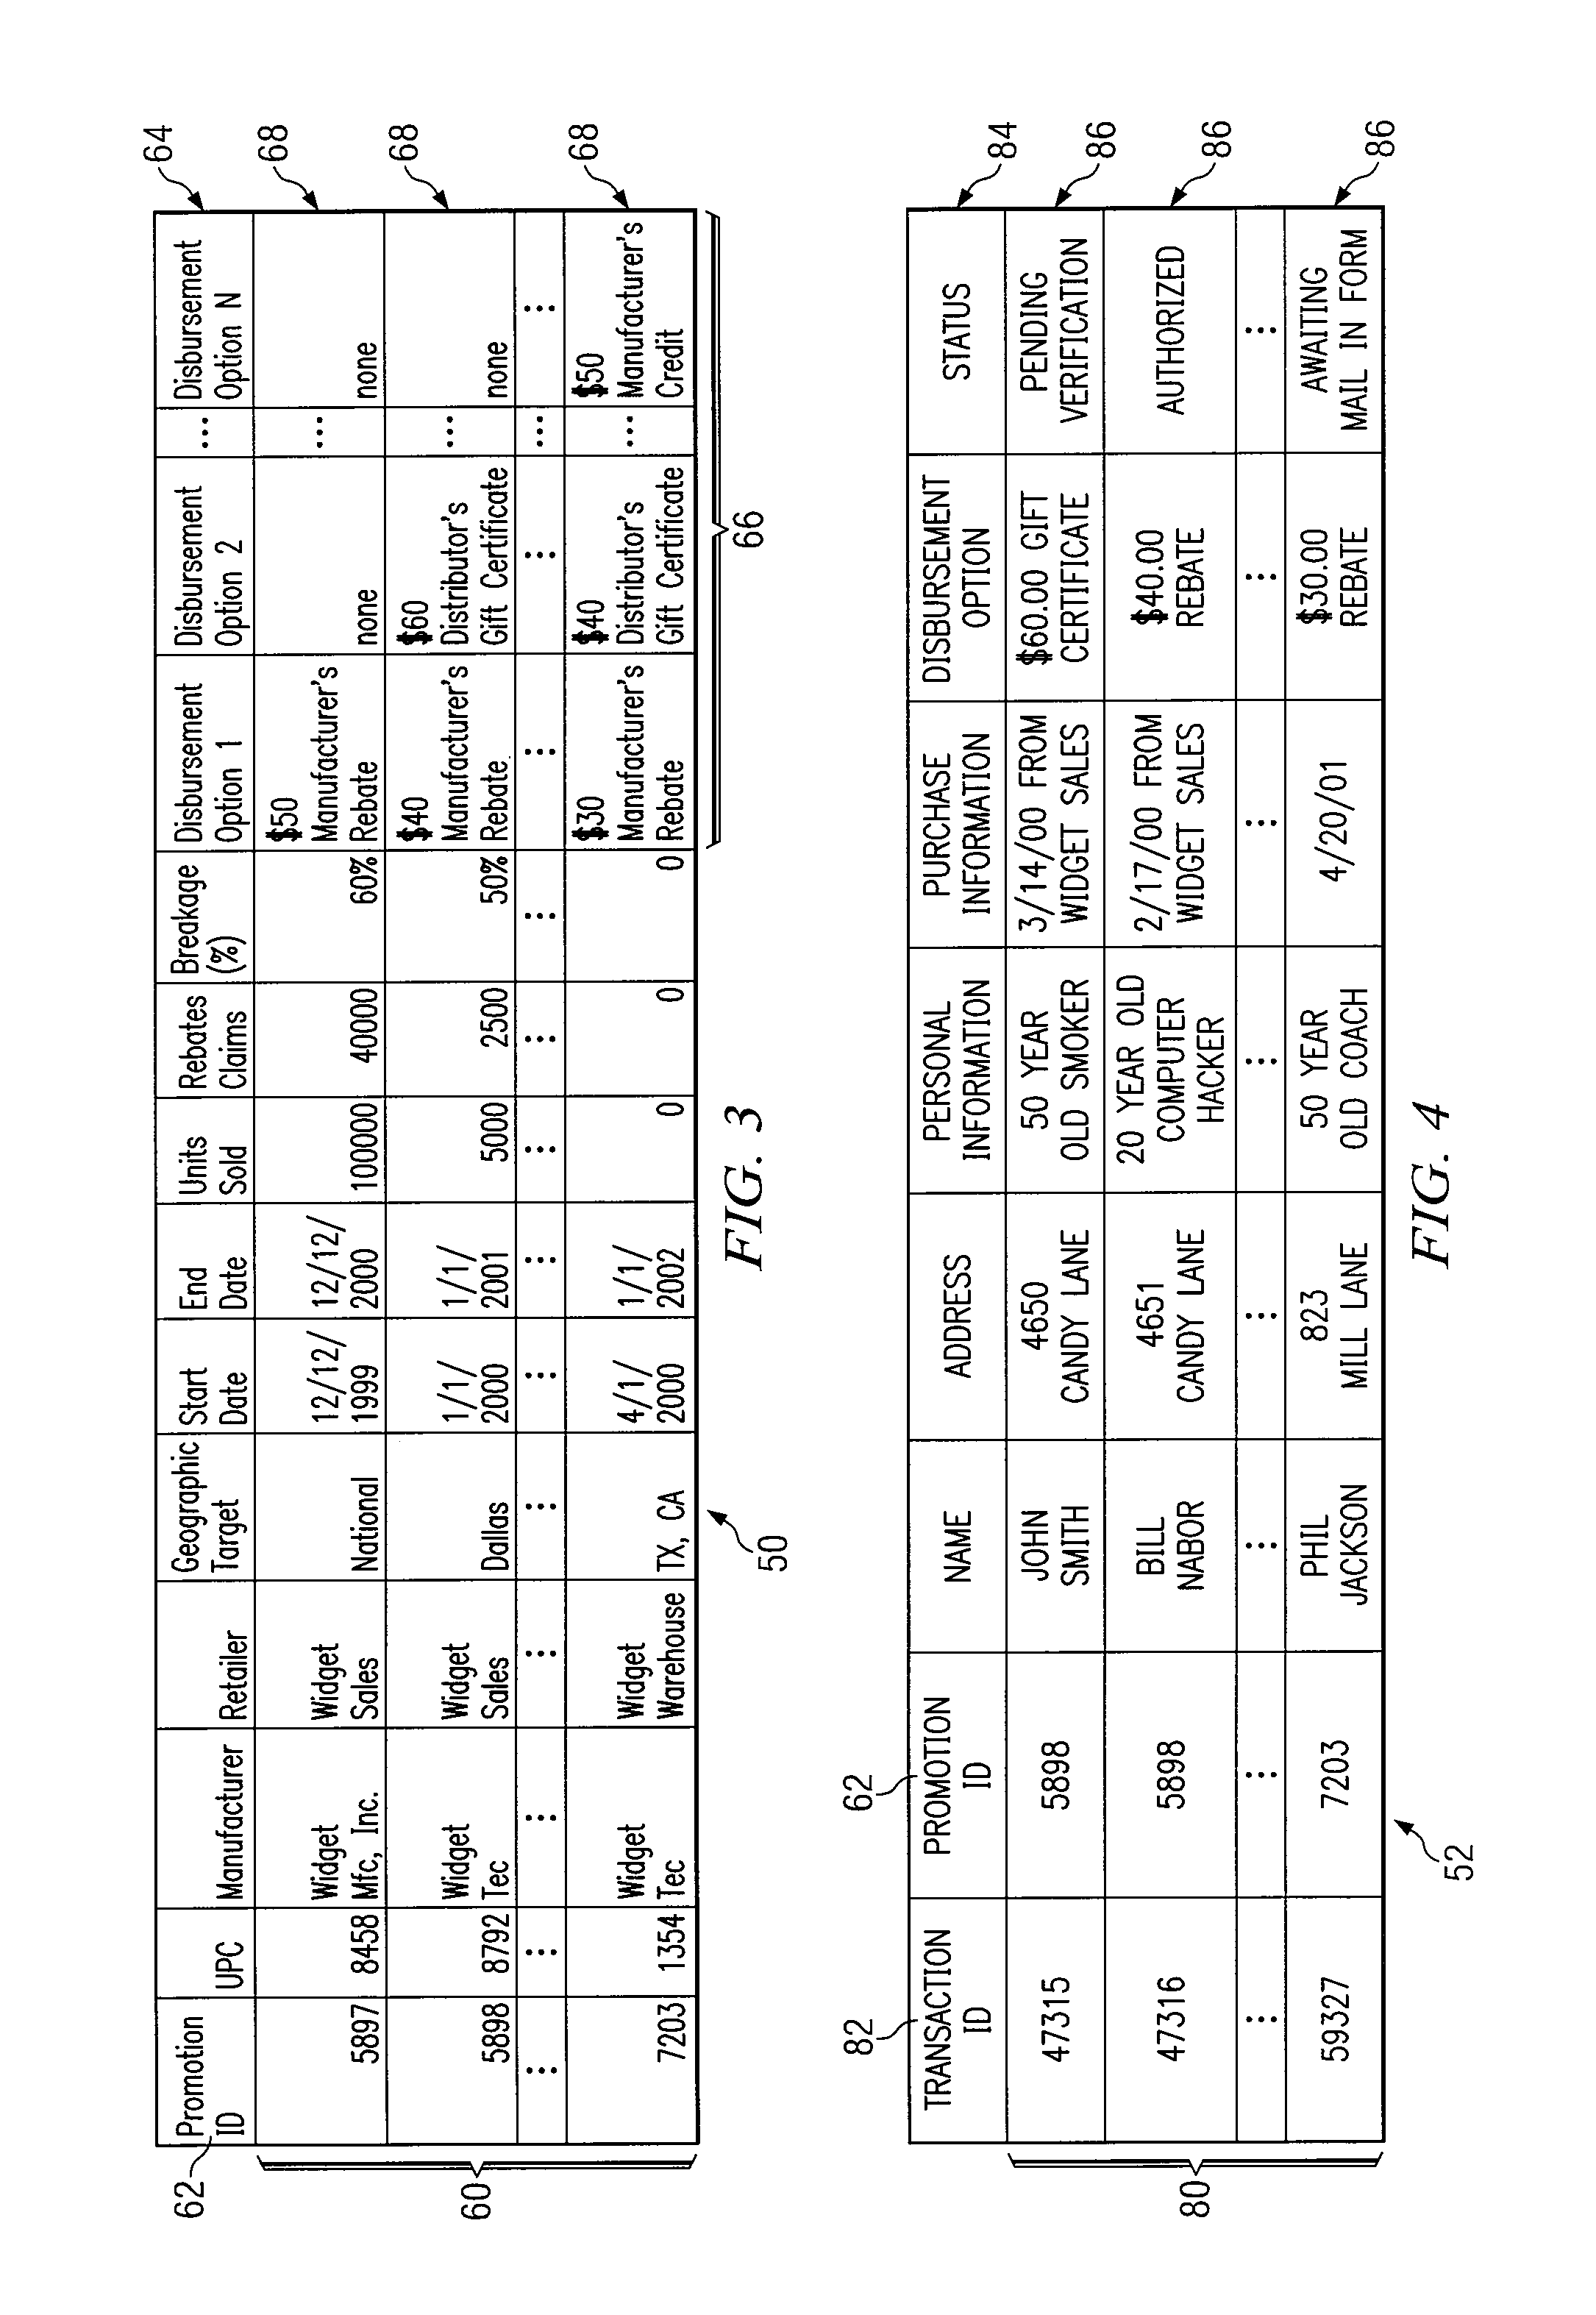 Rebate processing system and method providing promotions database and interface